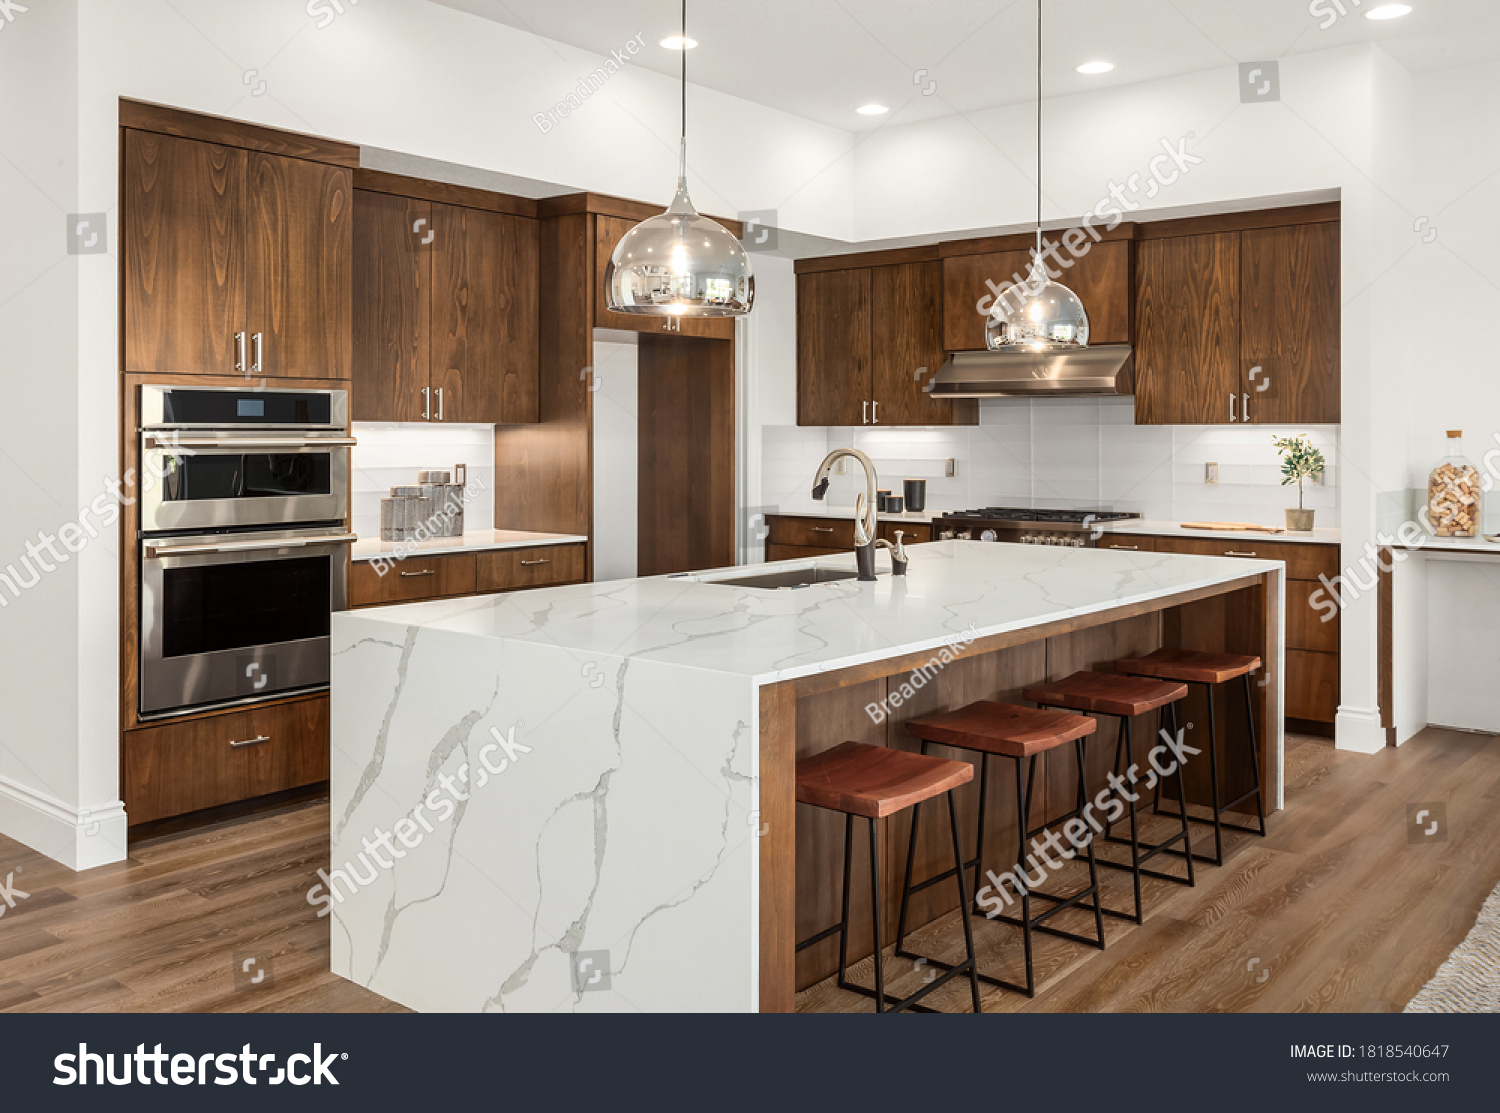 Kitchen in new luxury home with quartz waterfall island, hardwood floors, dark wood cabinets, and stainless steel appliances. #1818540647